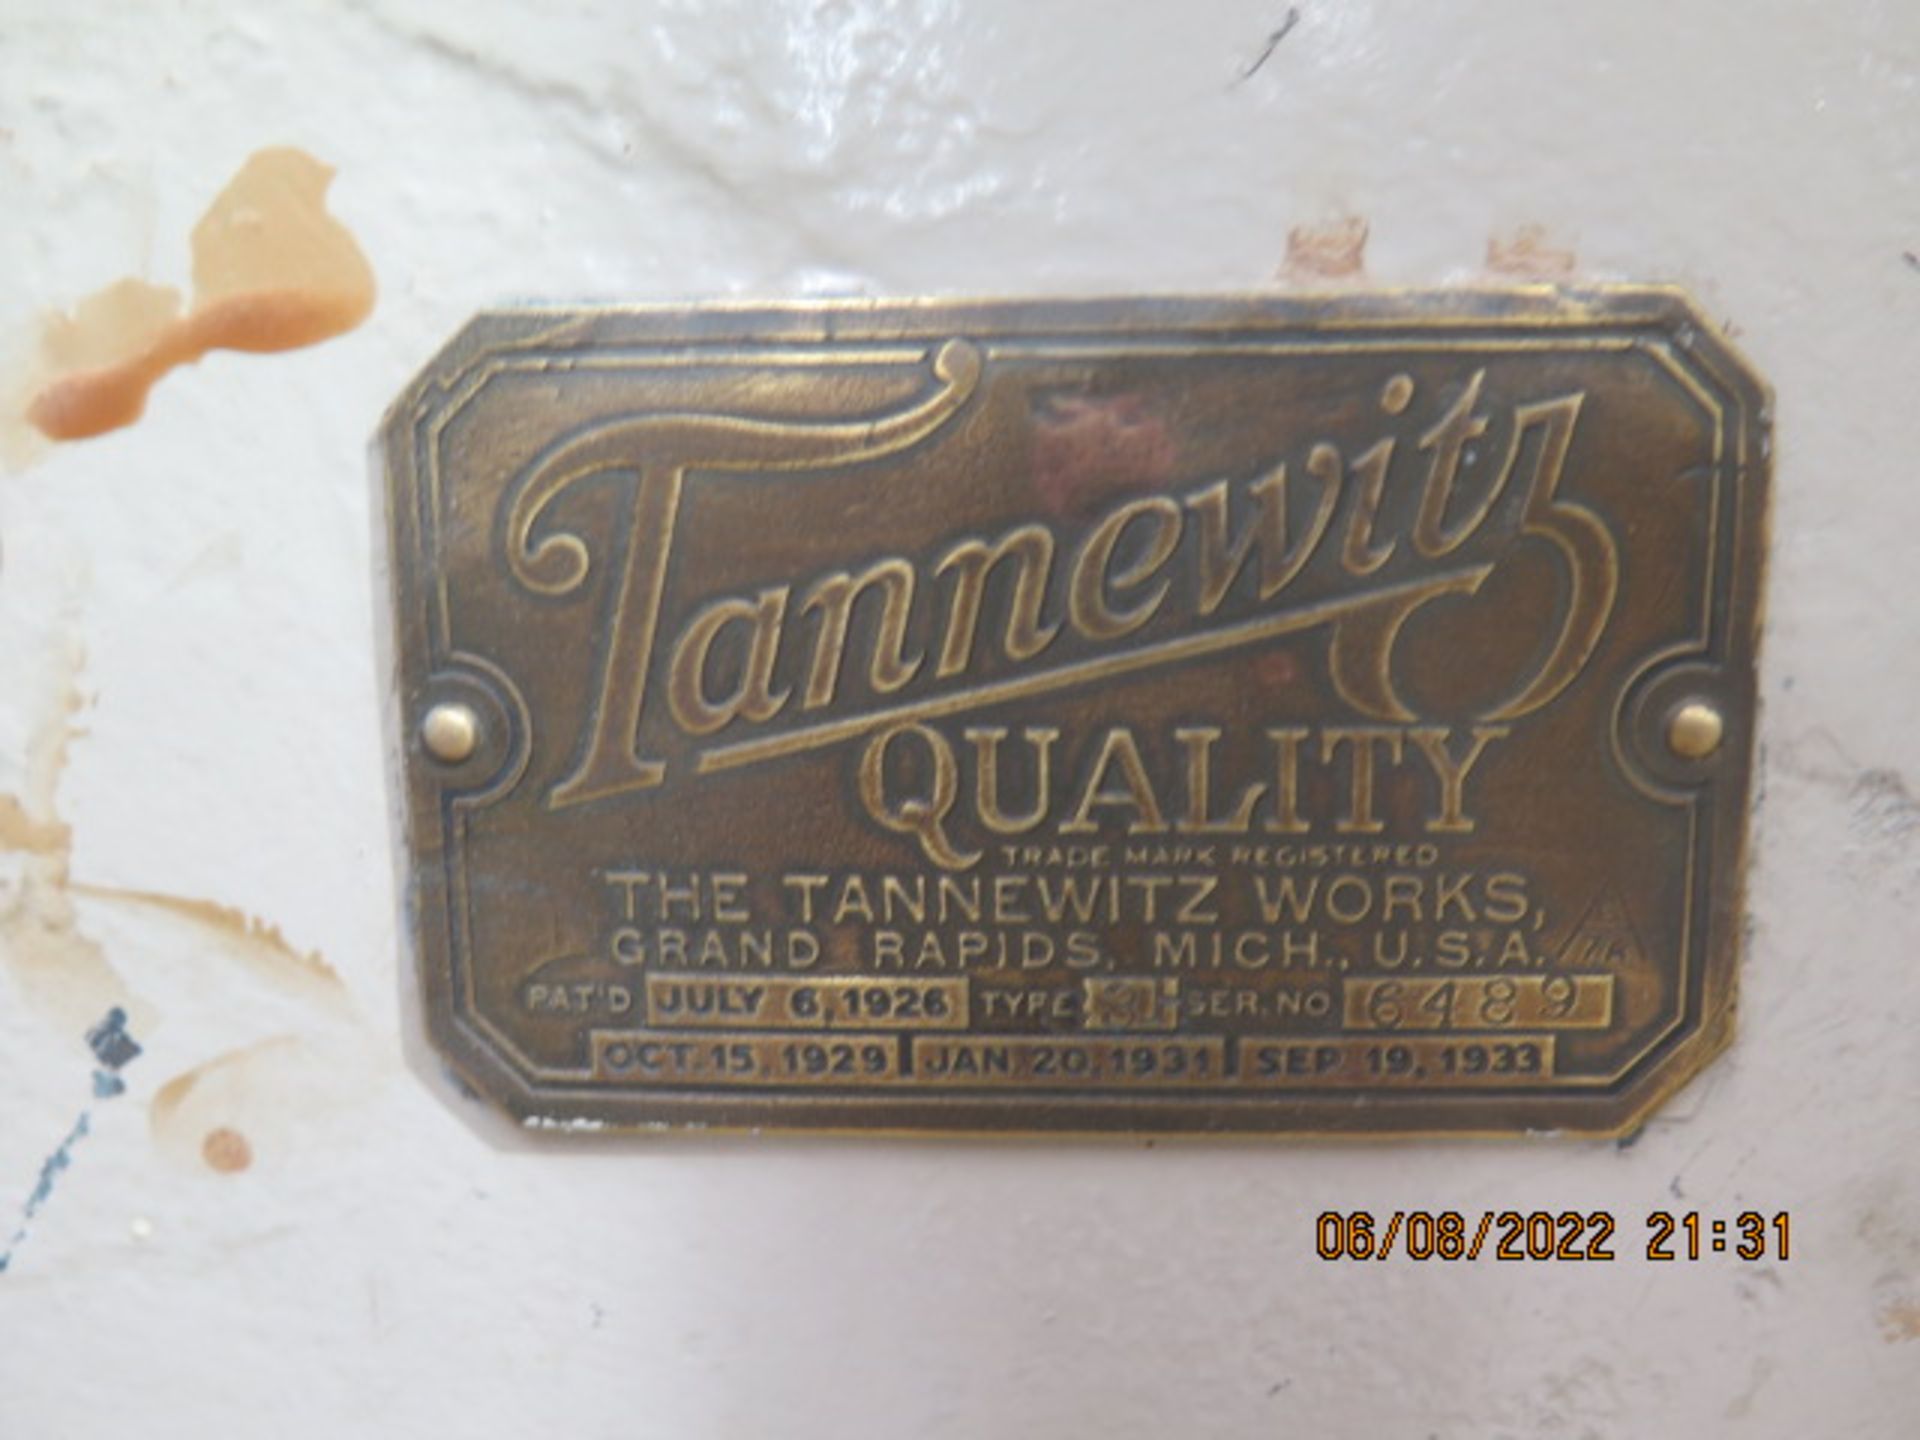 Tannewitz Type 3 35” Vertical Band Saw s/n 6498 w/ 36” x 37” Table (SOLD AS-IS - NO WARRANTY) - Image 7 of 7